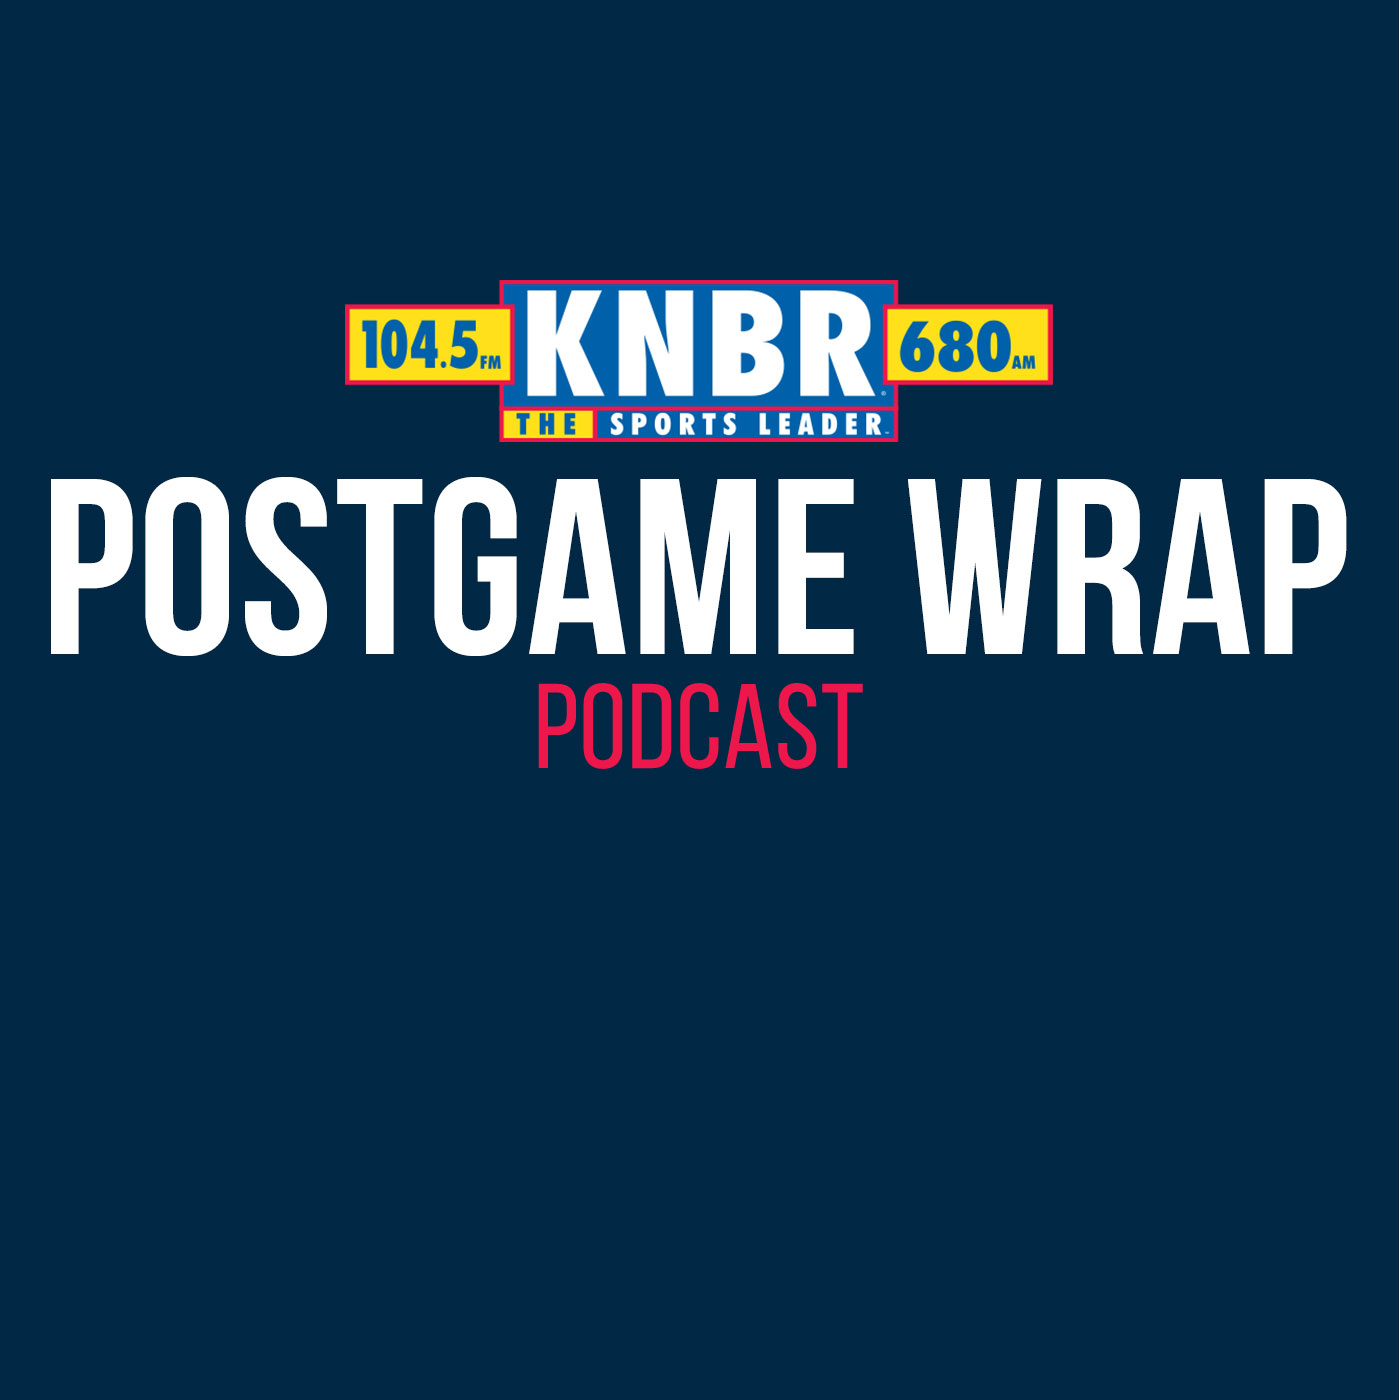 7-29 Postgame Wrap: Giants 3, Red Sox 2